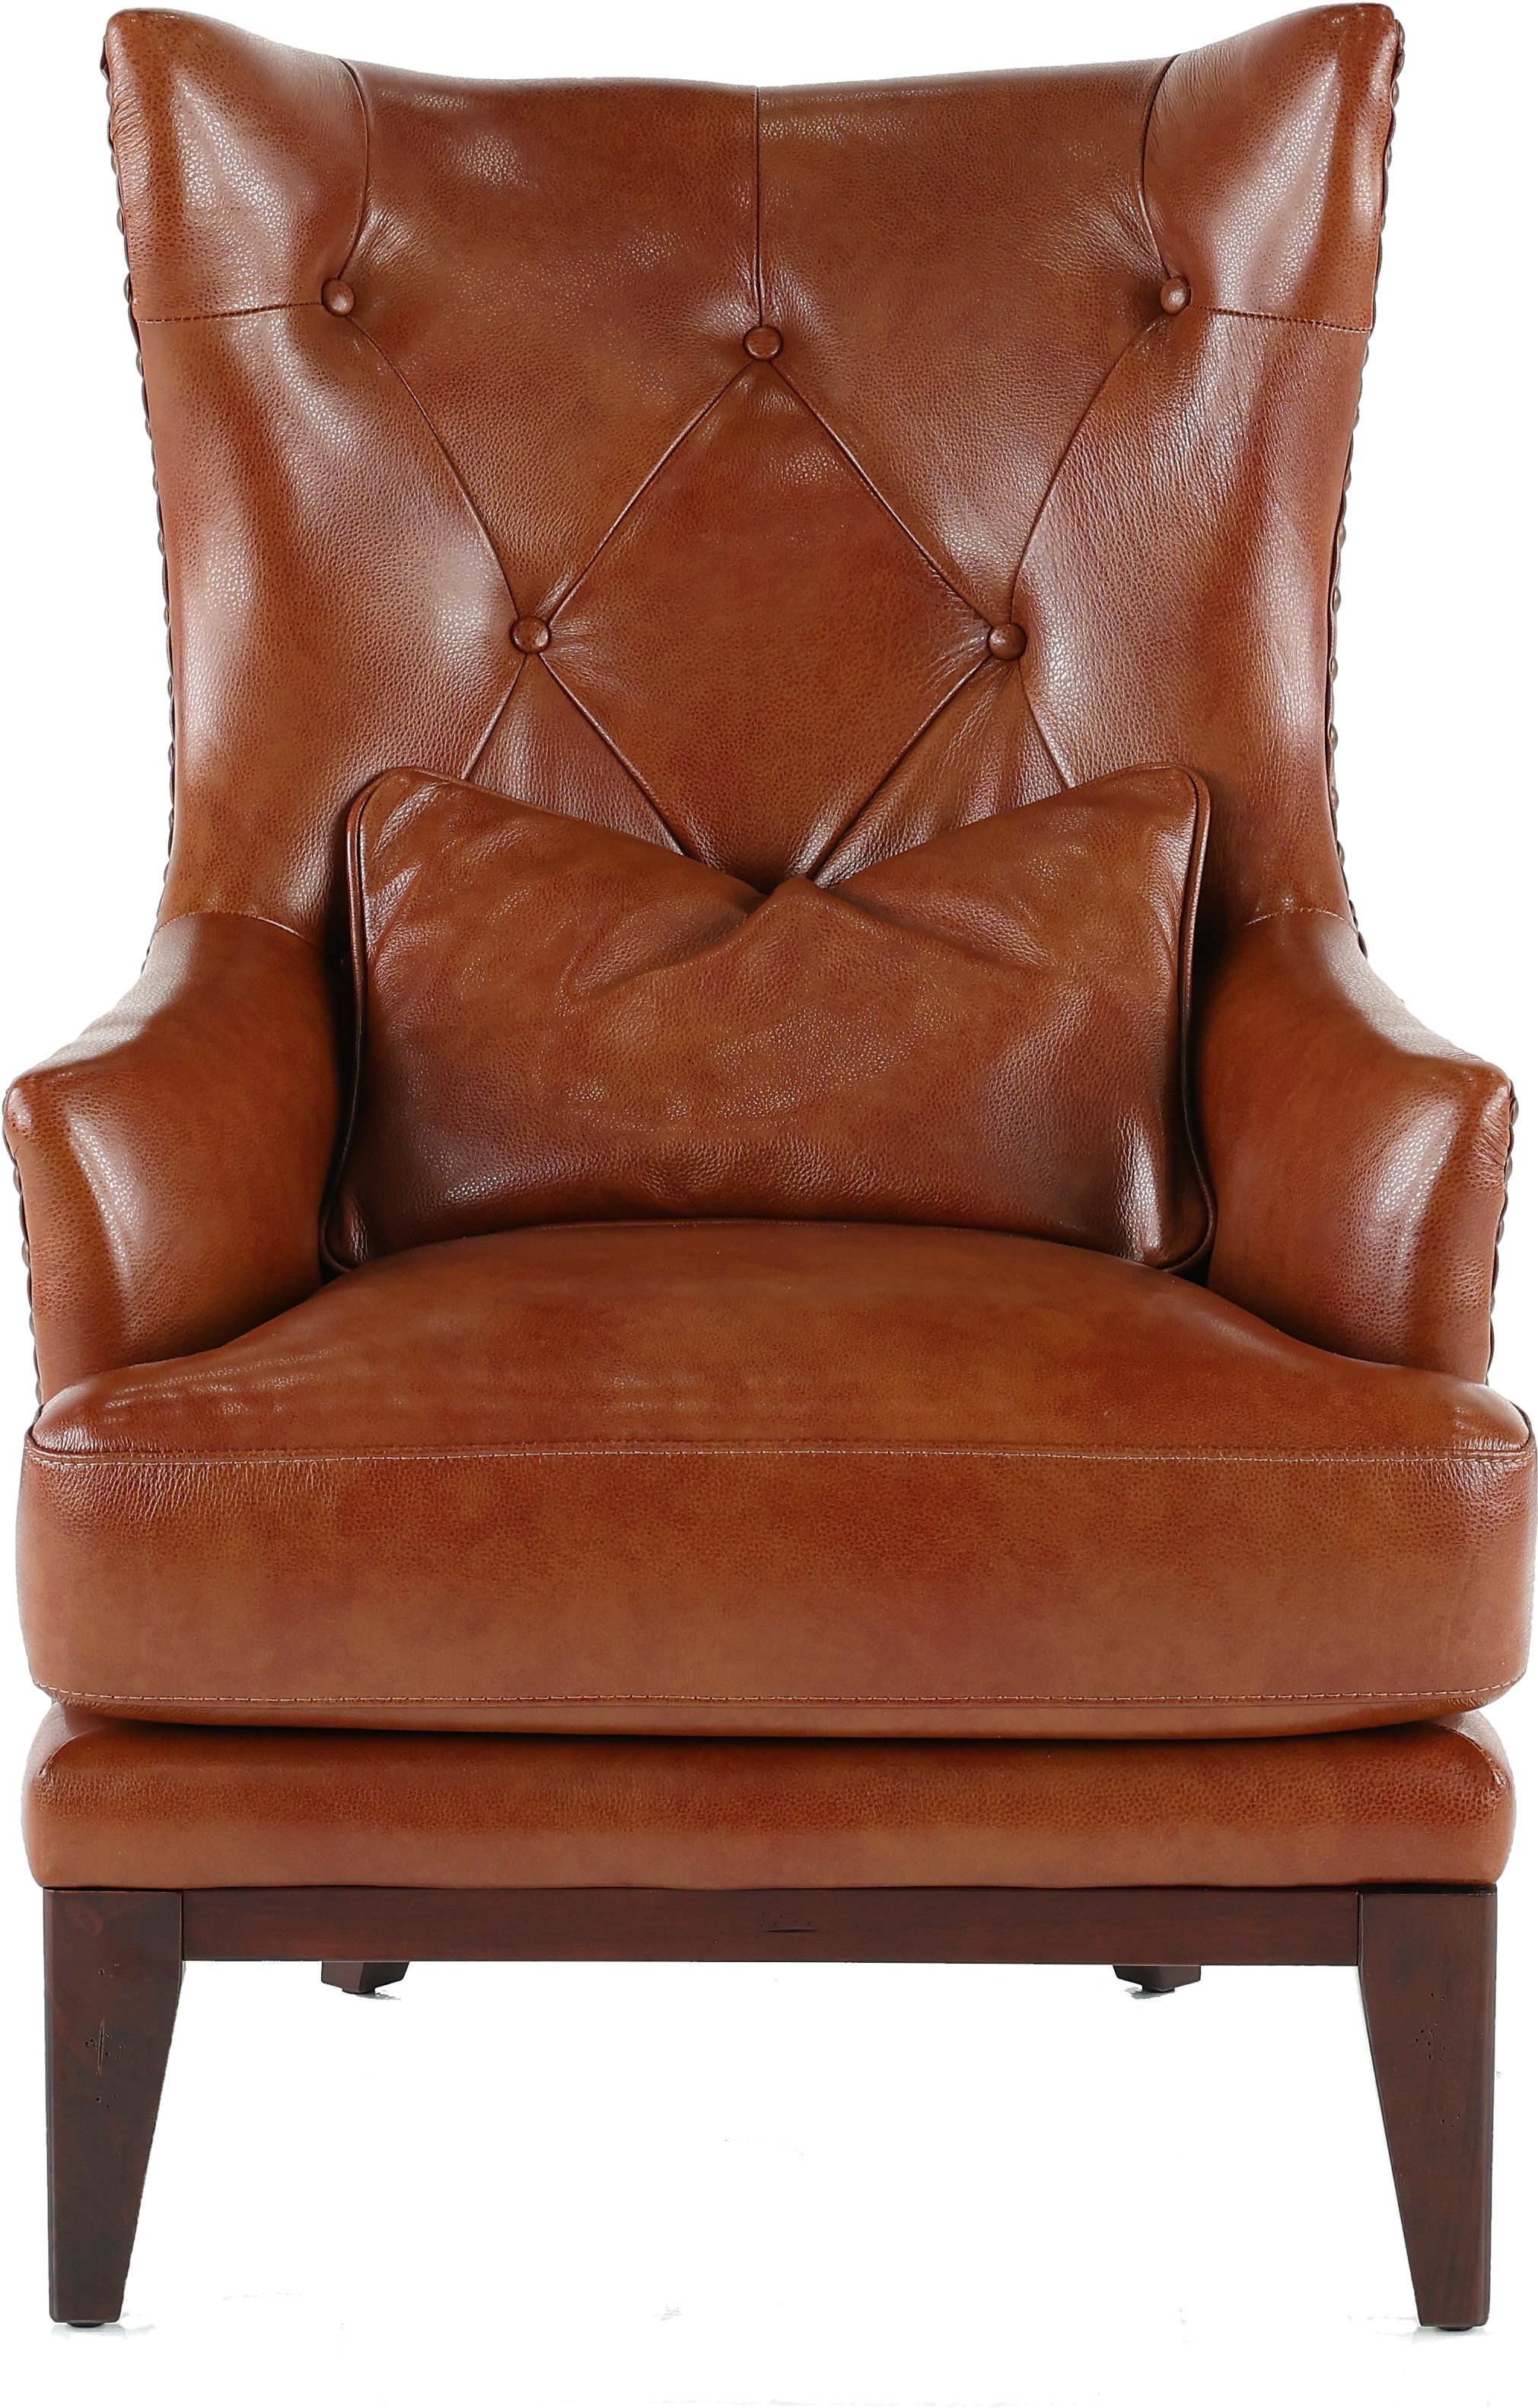 Chestnut Brown Leather-Match Accent Chair & Ottoman - Brewster | RC